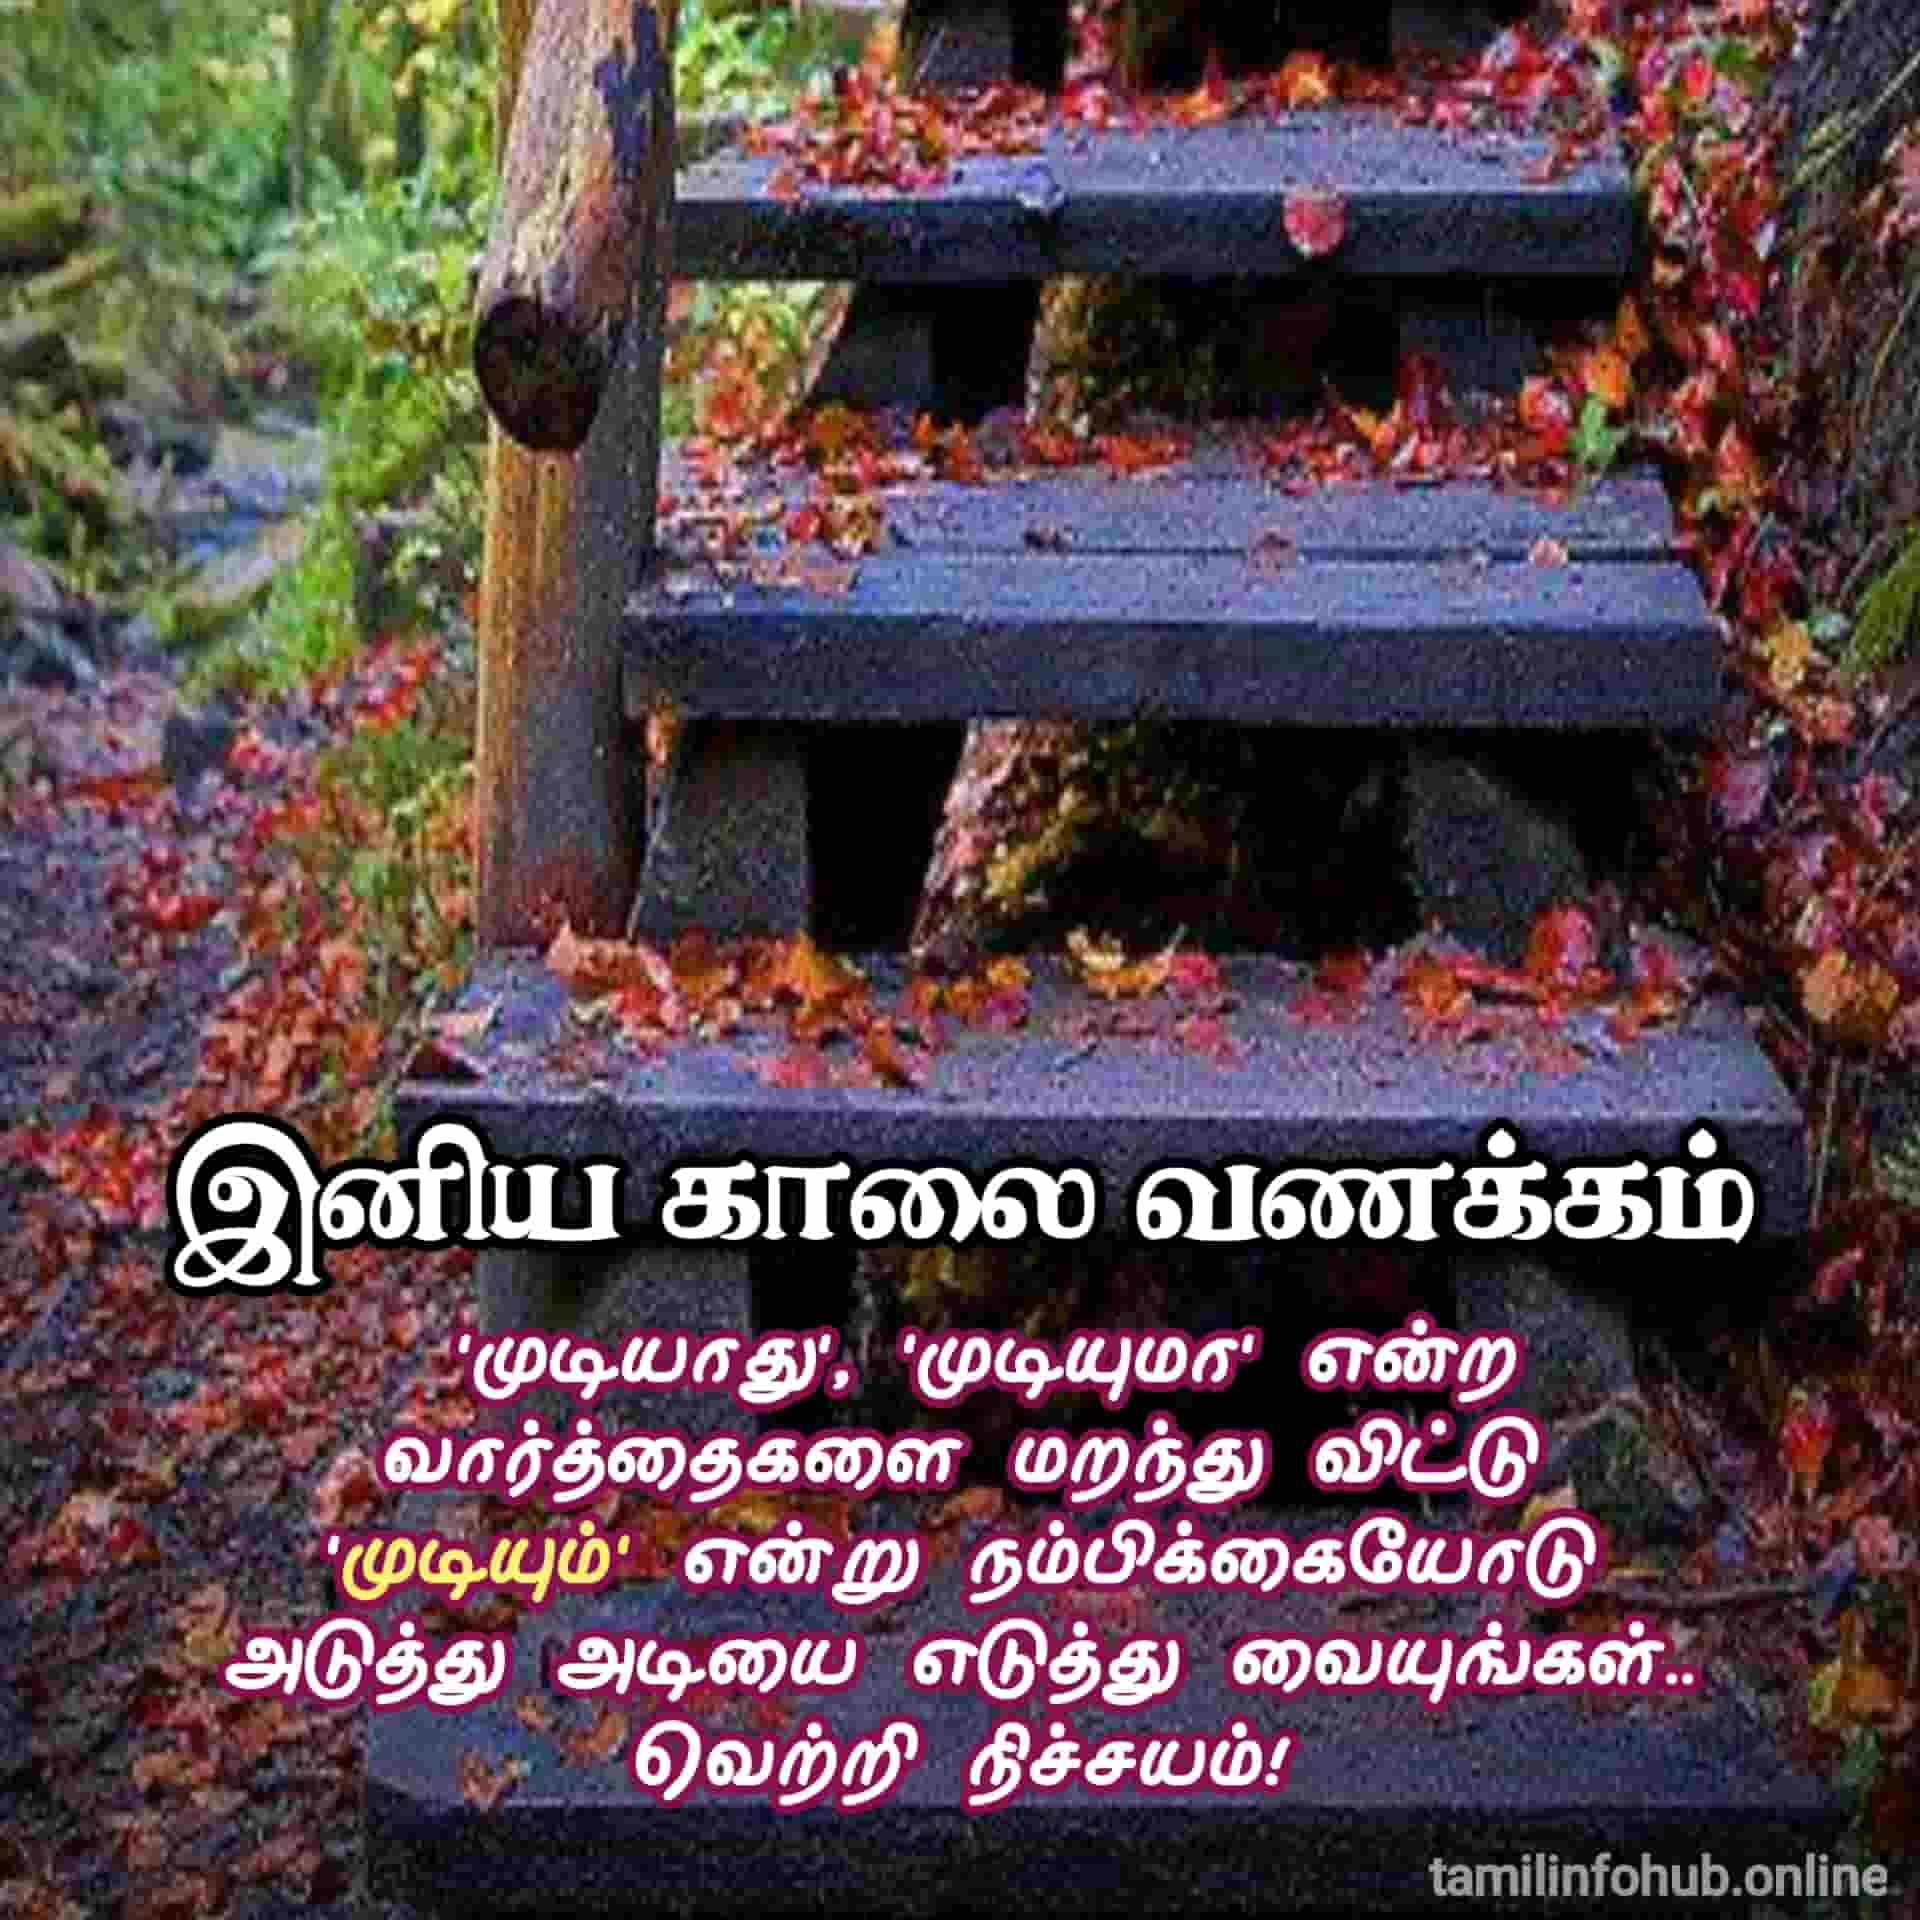 Good morning quotes in tamil